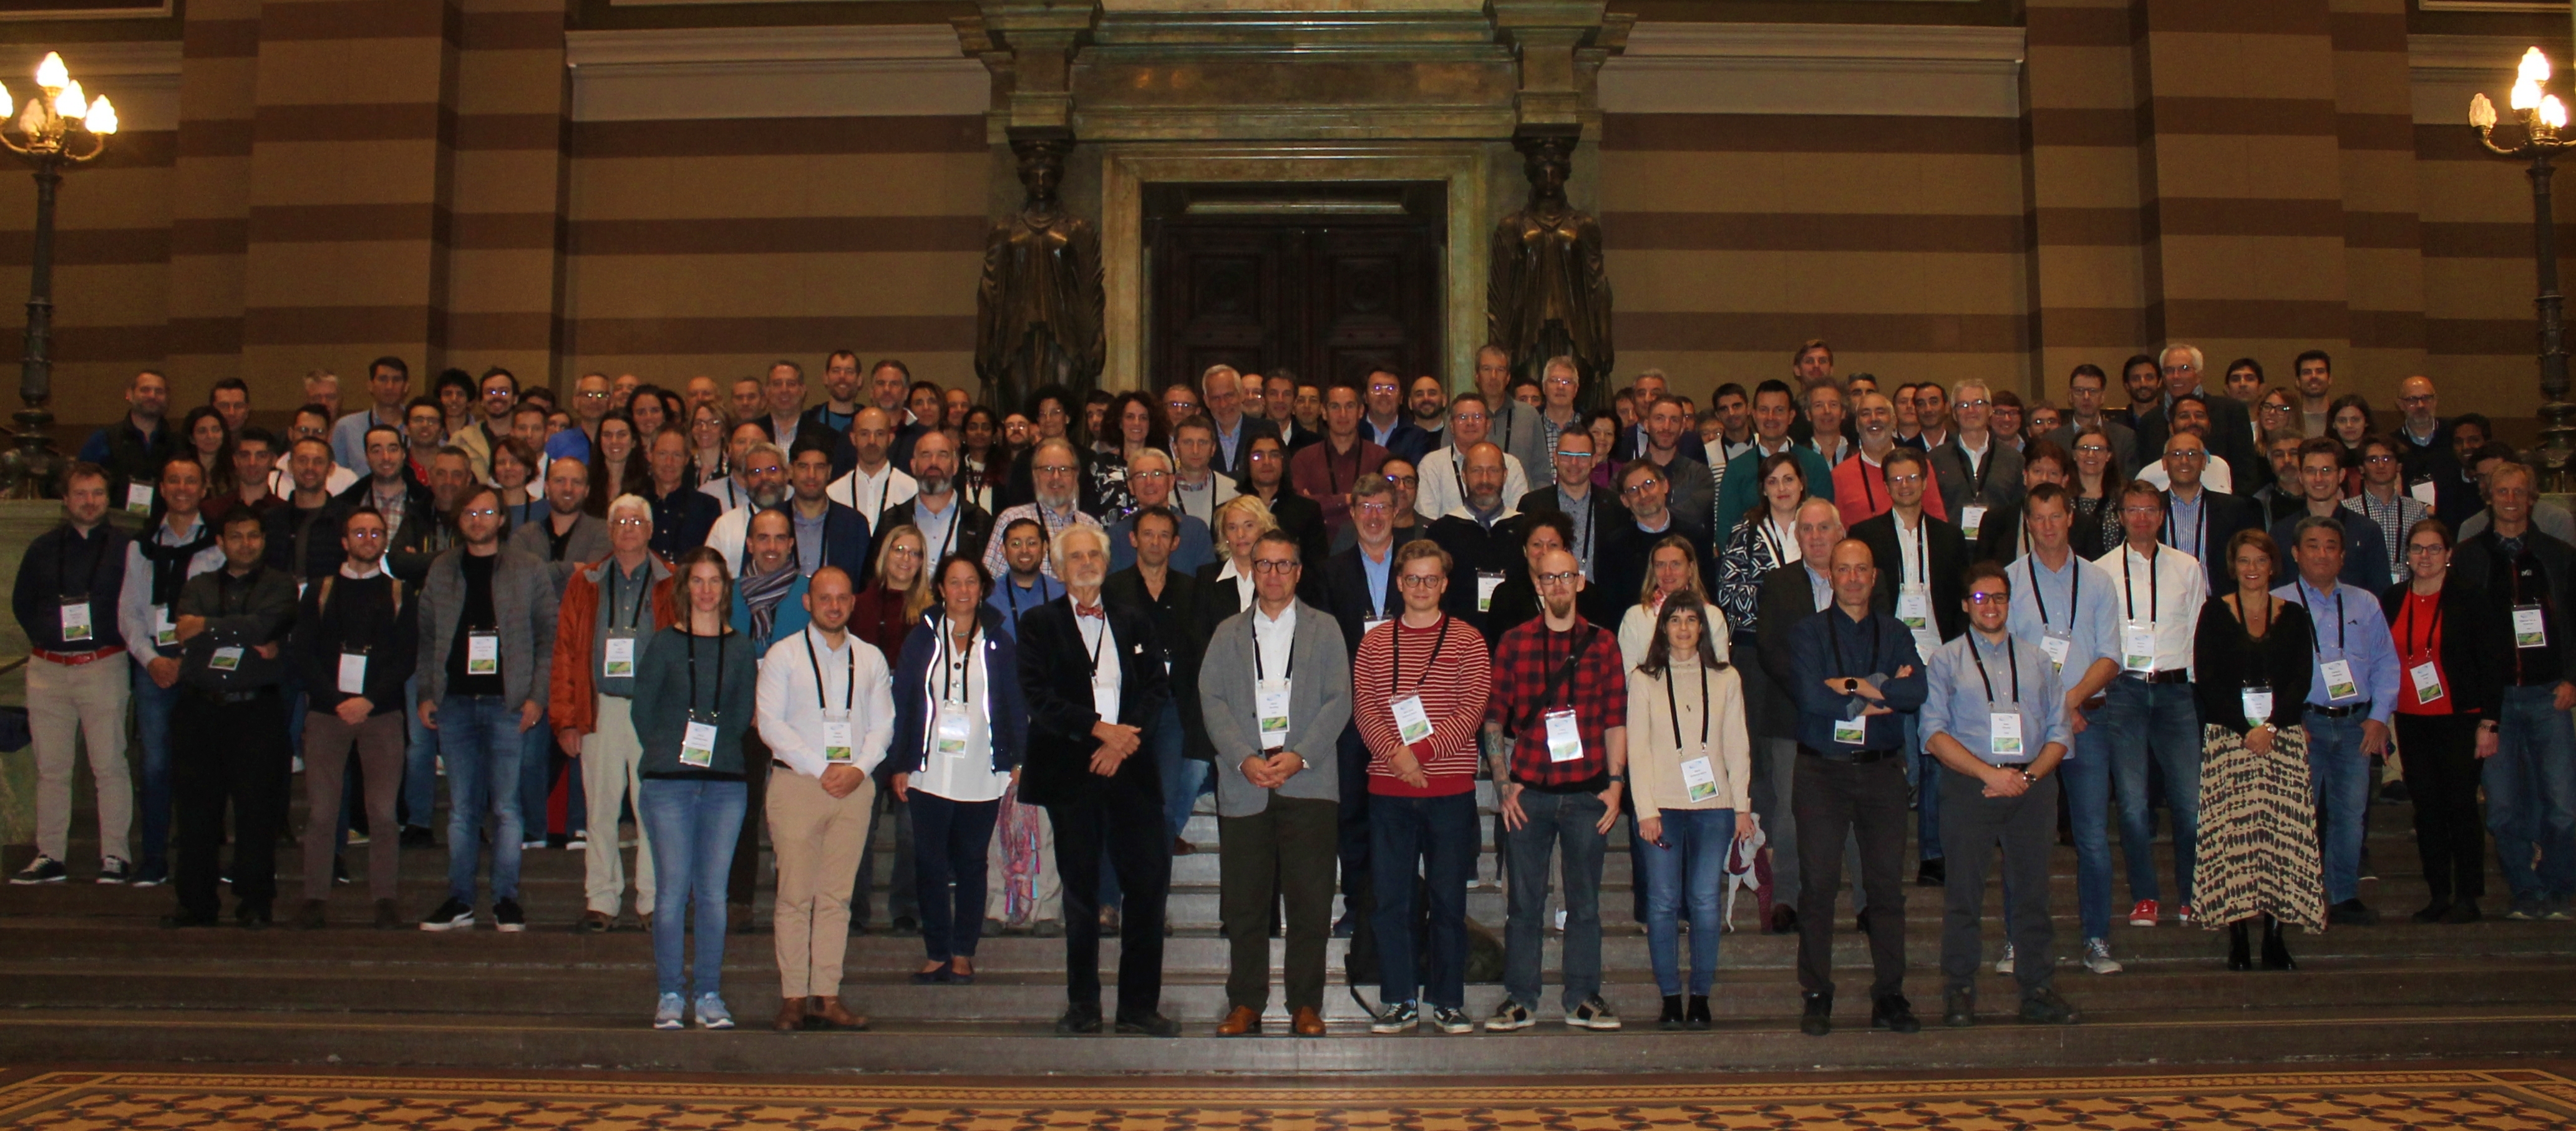 The 12th HL-LHC Collaboration Meeting brought together more than 150 participants in Uppsala, Sweden, from 19 to 22 September 2022. HiLumi participants stand on the stairs of the Uppsala University Main Building for the traditional group picture.